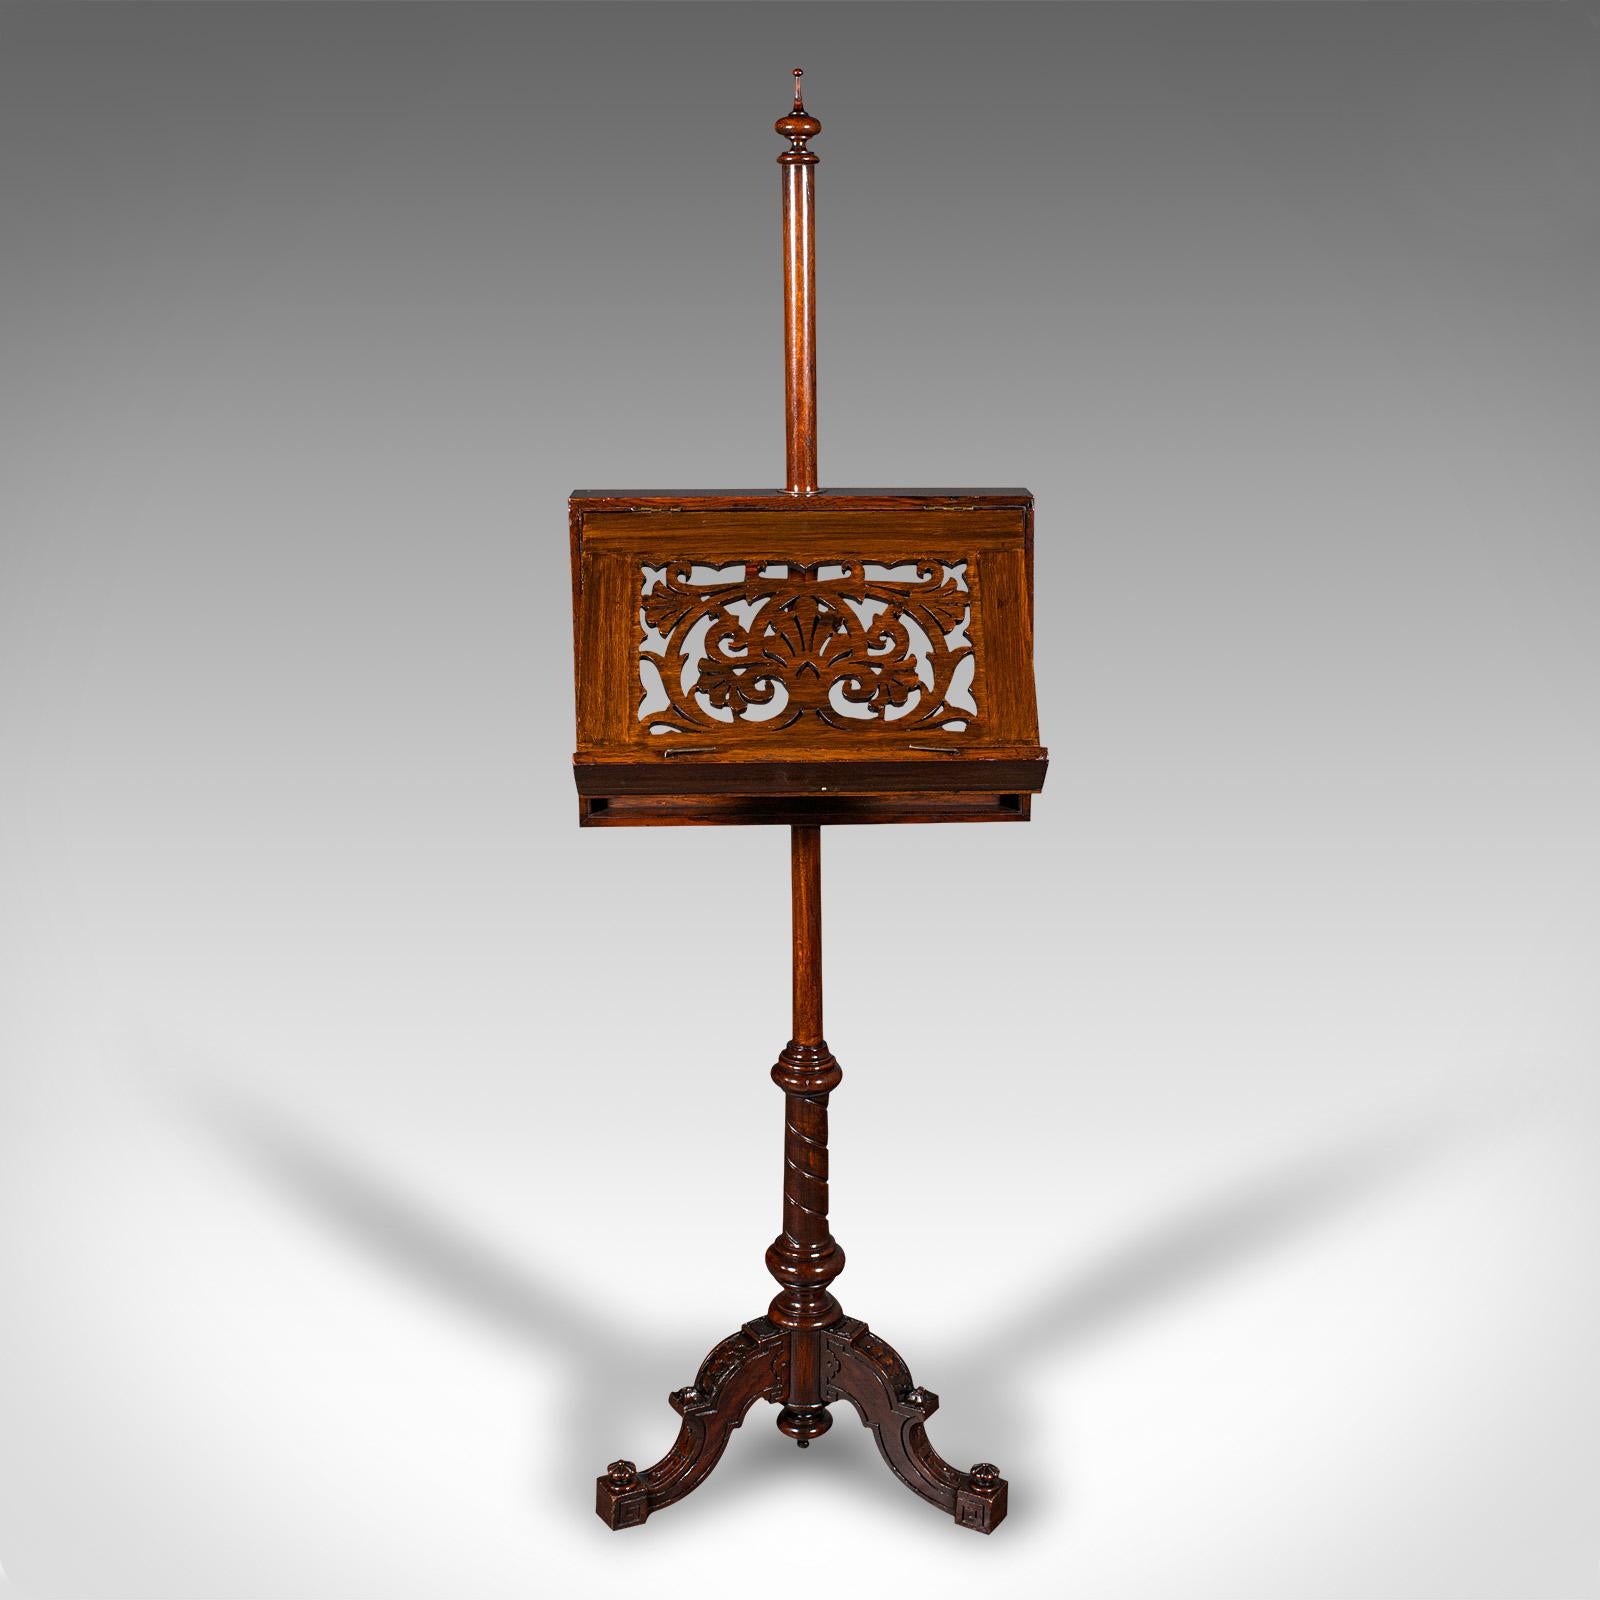 Tall Antique Music Stand, English, Oak, Adjustable Recital Rest, Victorian, 1880 In Good Condition For Sale In Hele, Devon, GB